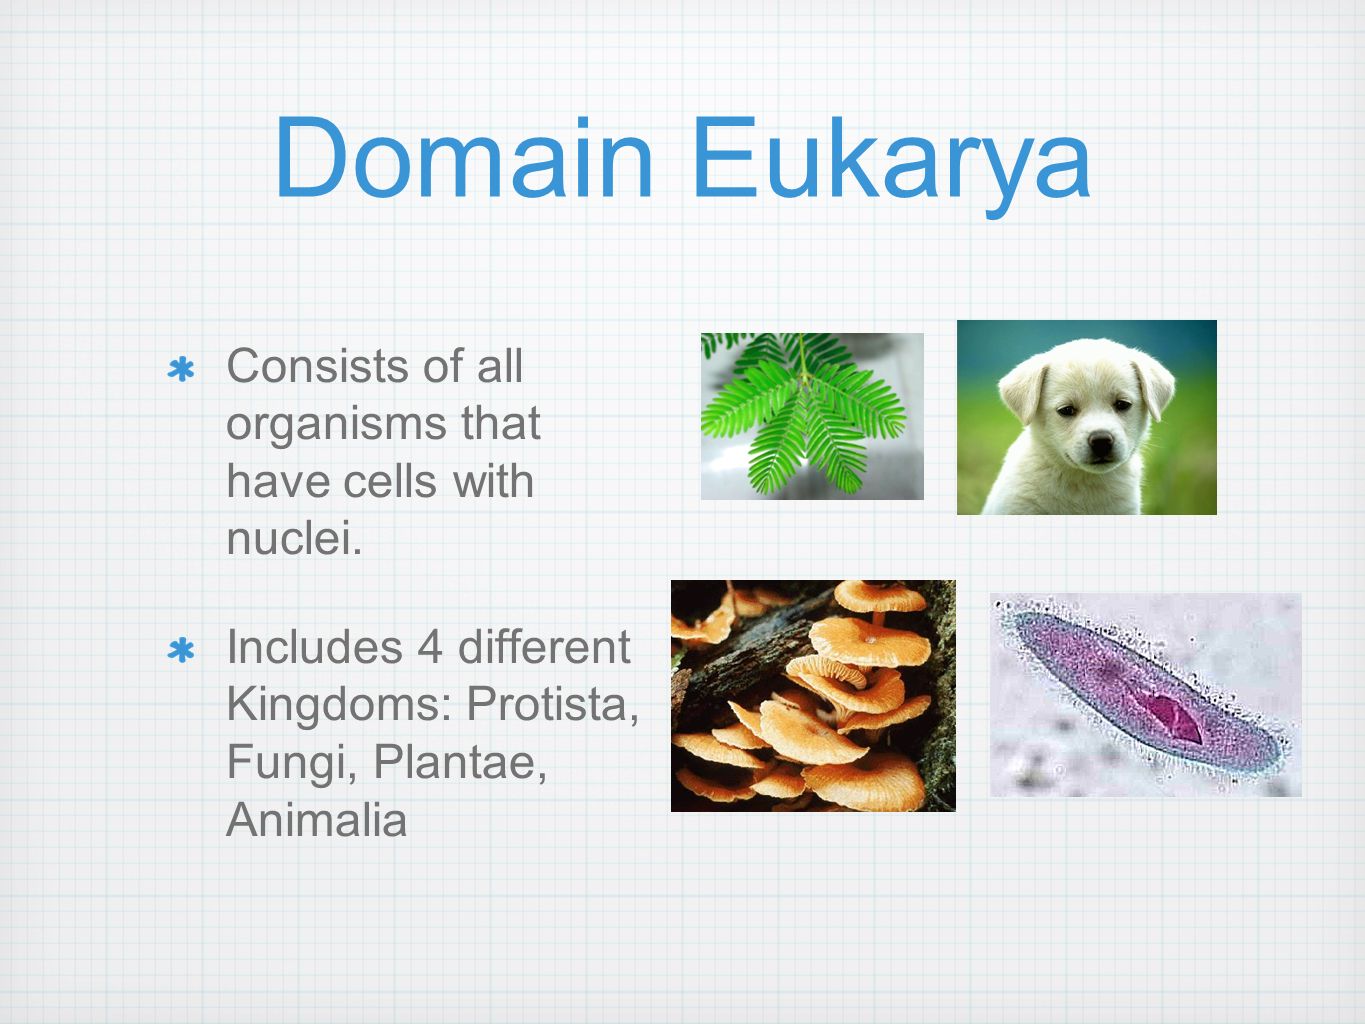 Domain Eukarya Consists of all organisms that have cells with nuclei.